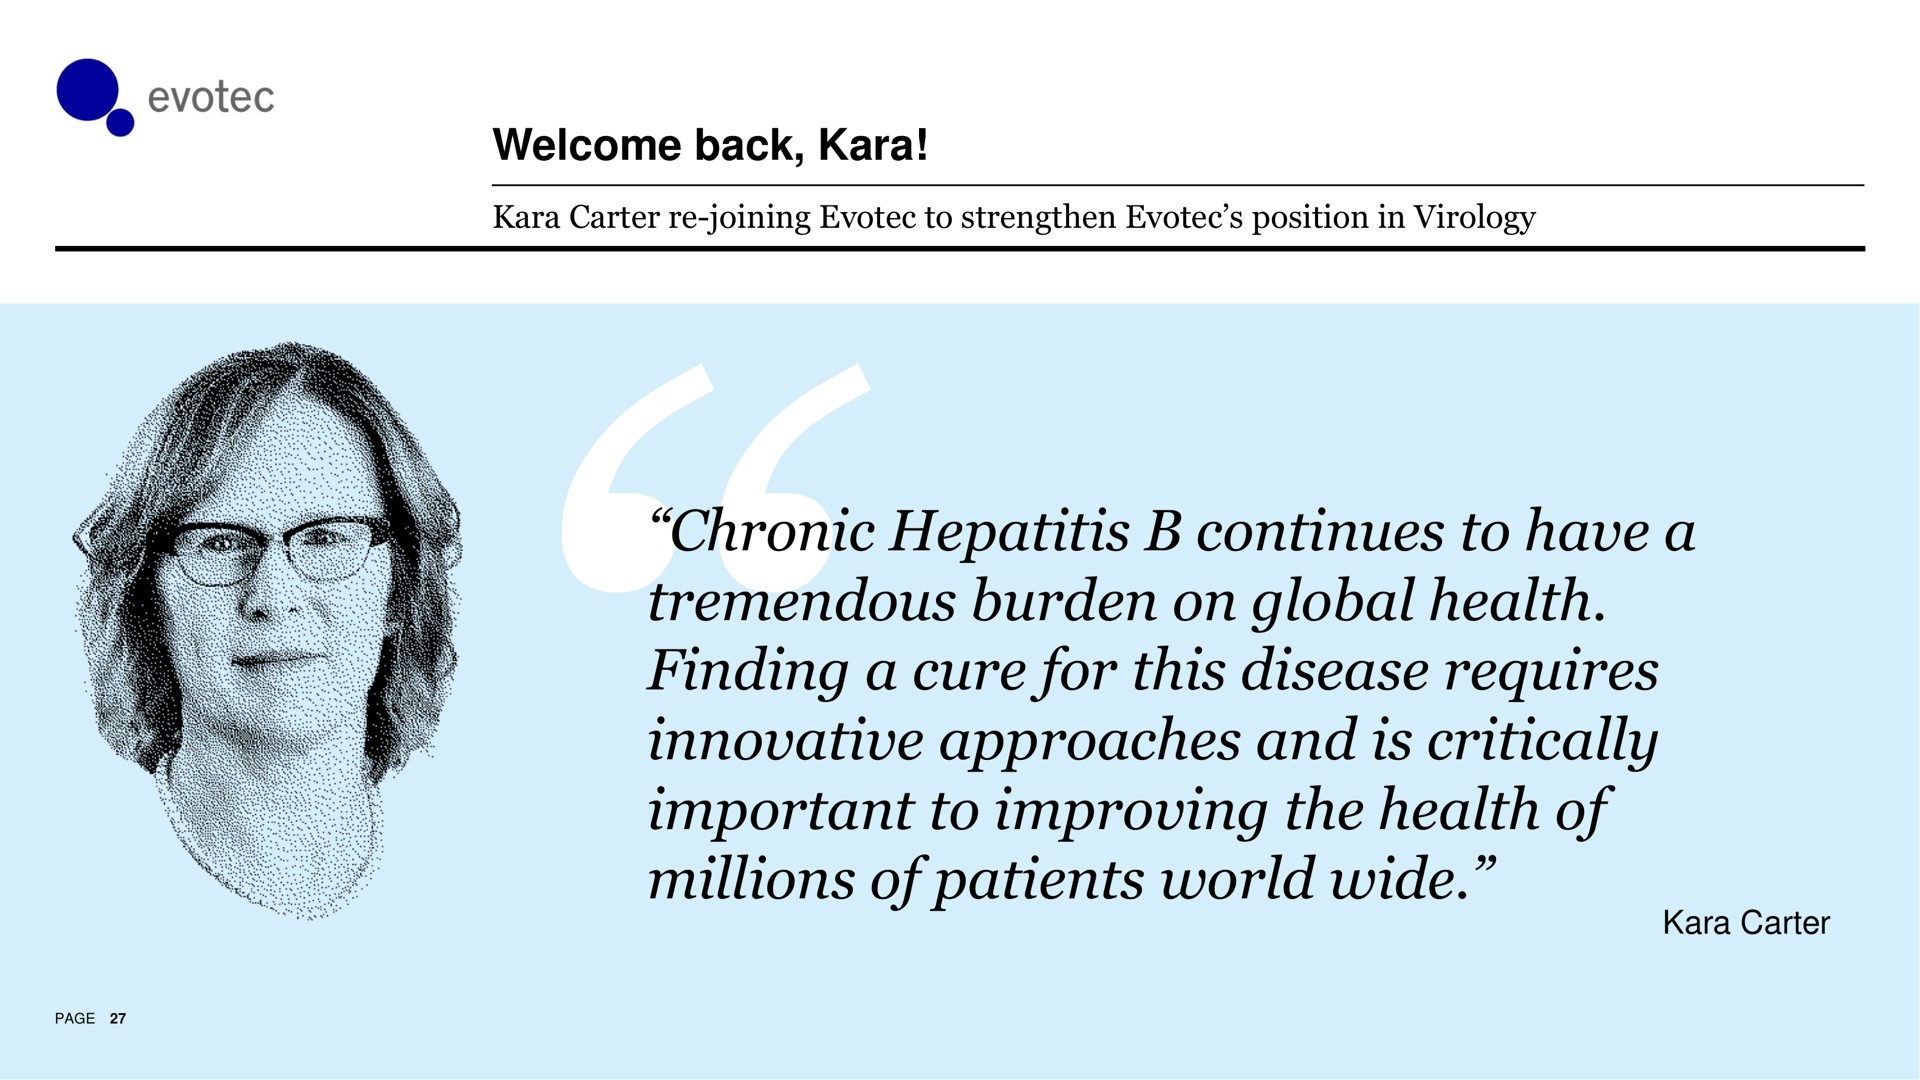 welcome back chronic hepatitis continues to have a tremendous burden on global health finding a cure for this disease requires innovative approaches and is critically important to improving the health of millions of patients world wide | Evotec